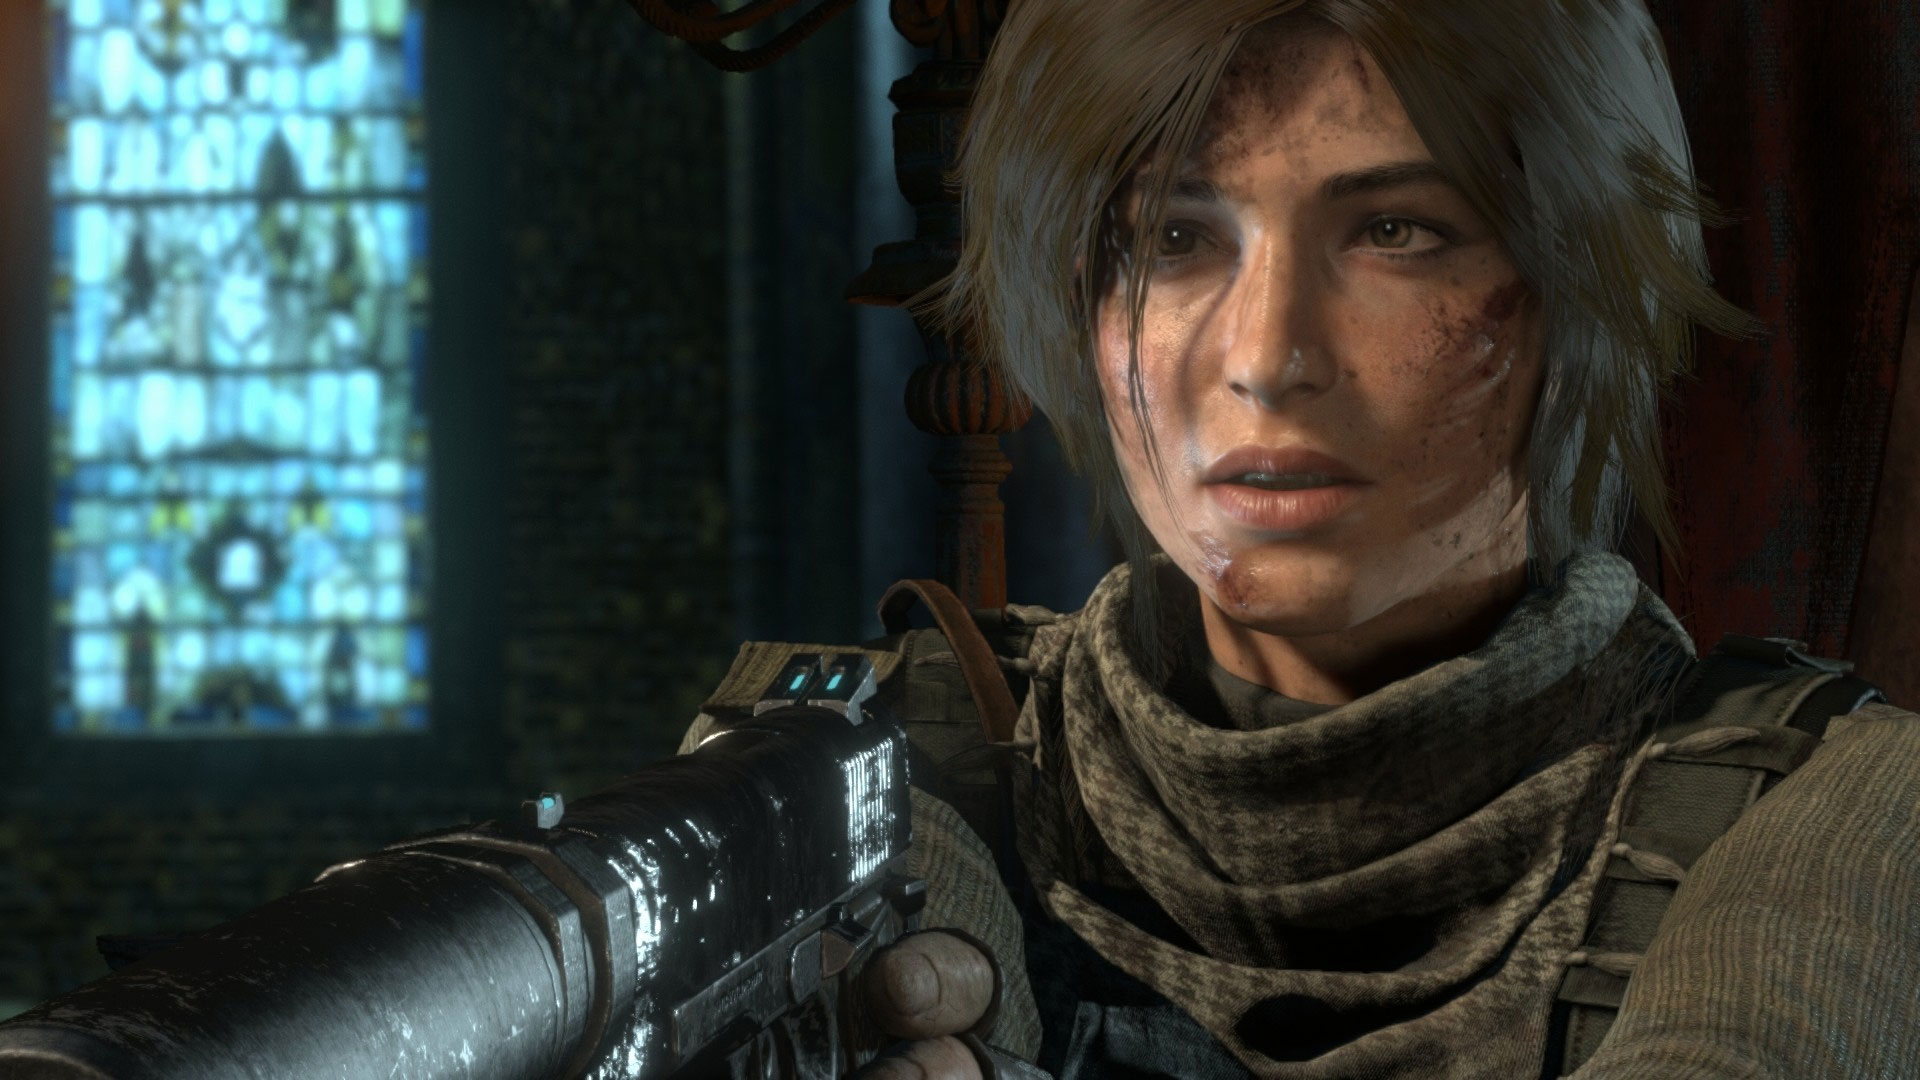 rise of the tomb raider ps4